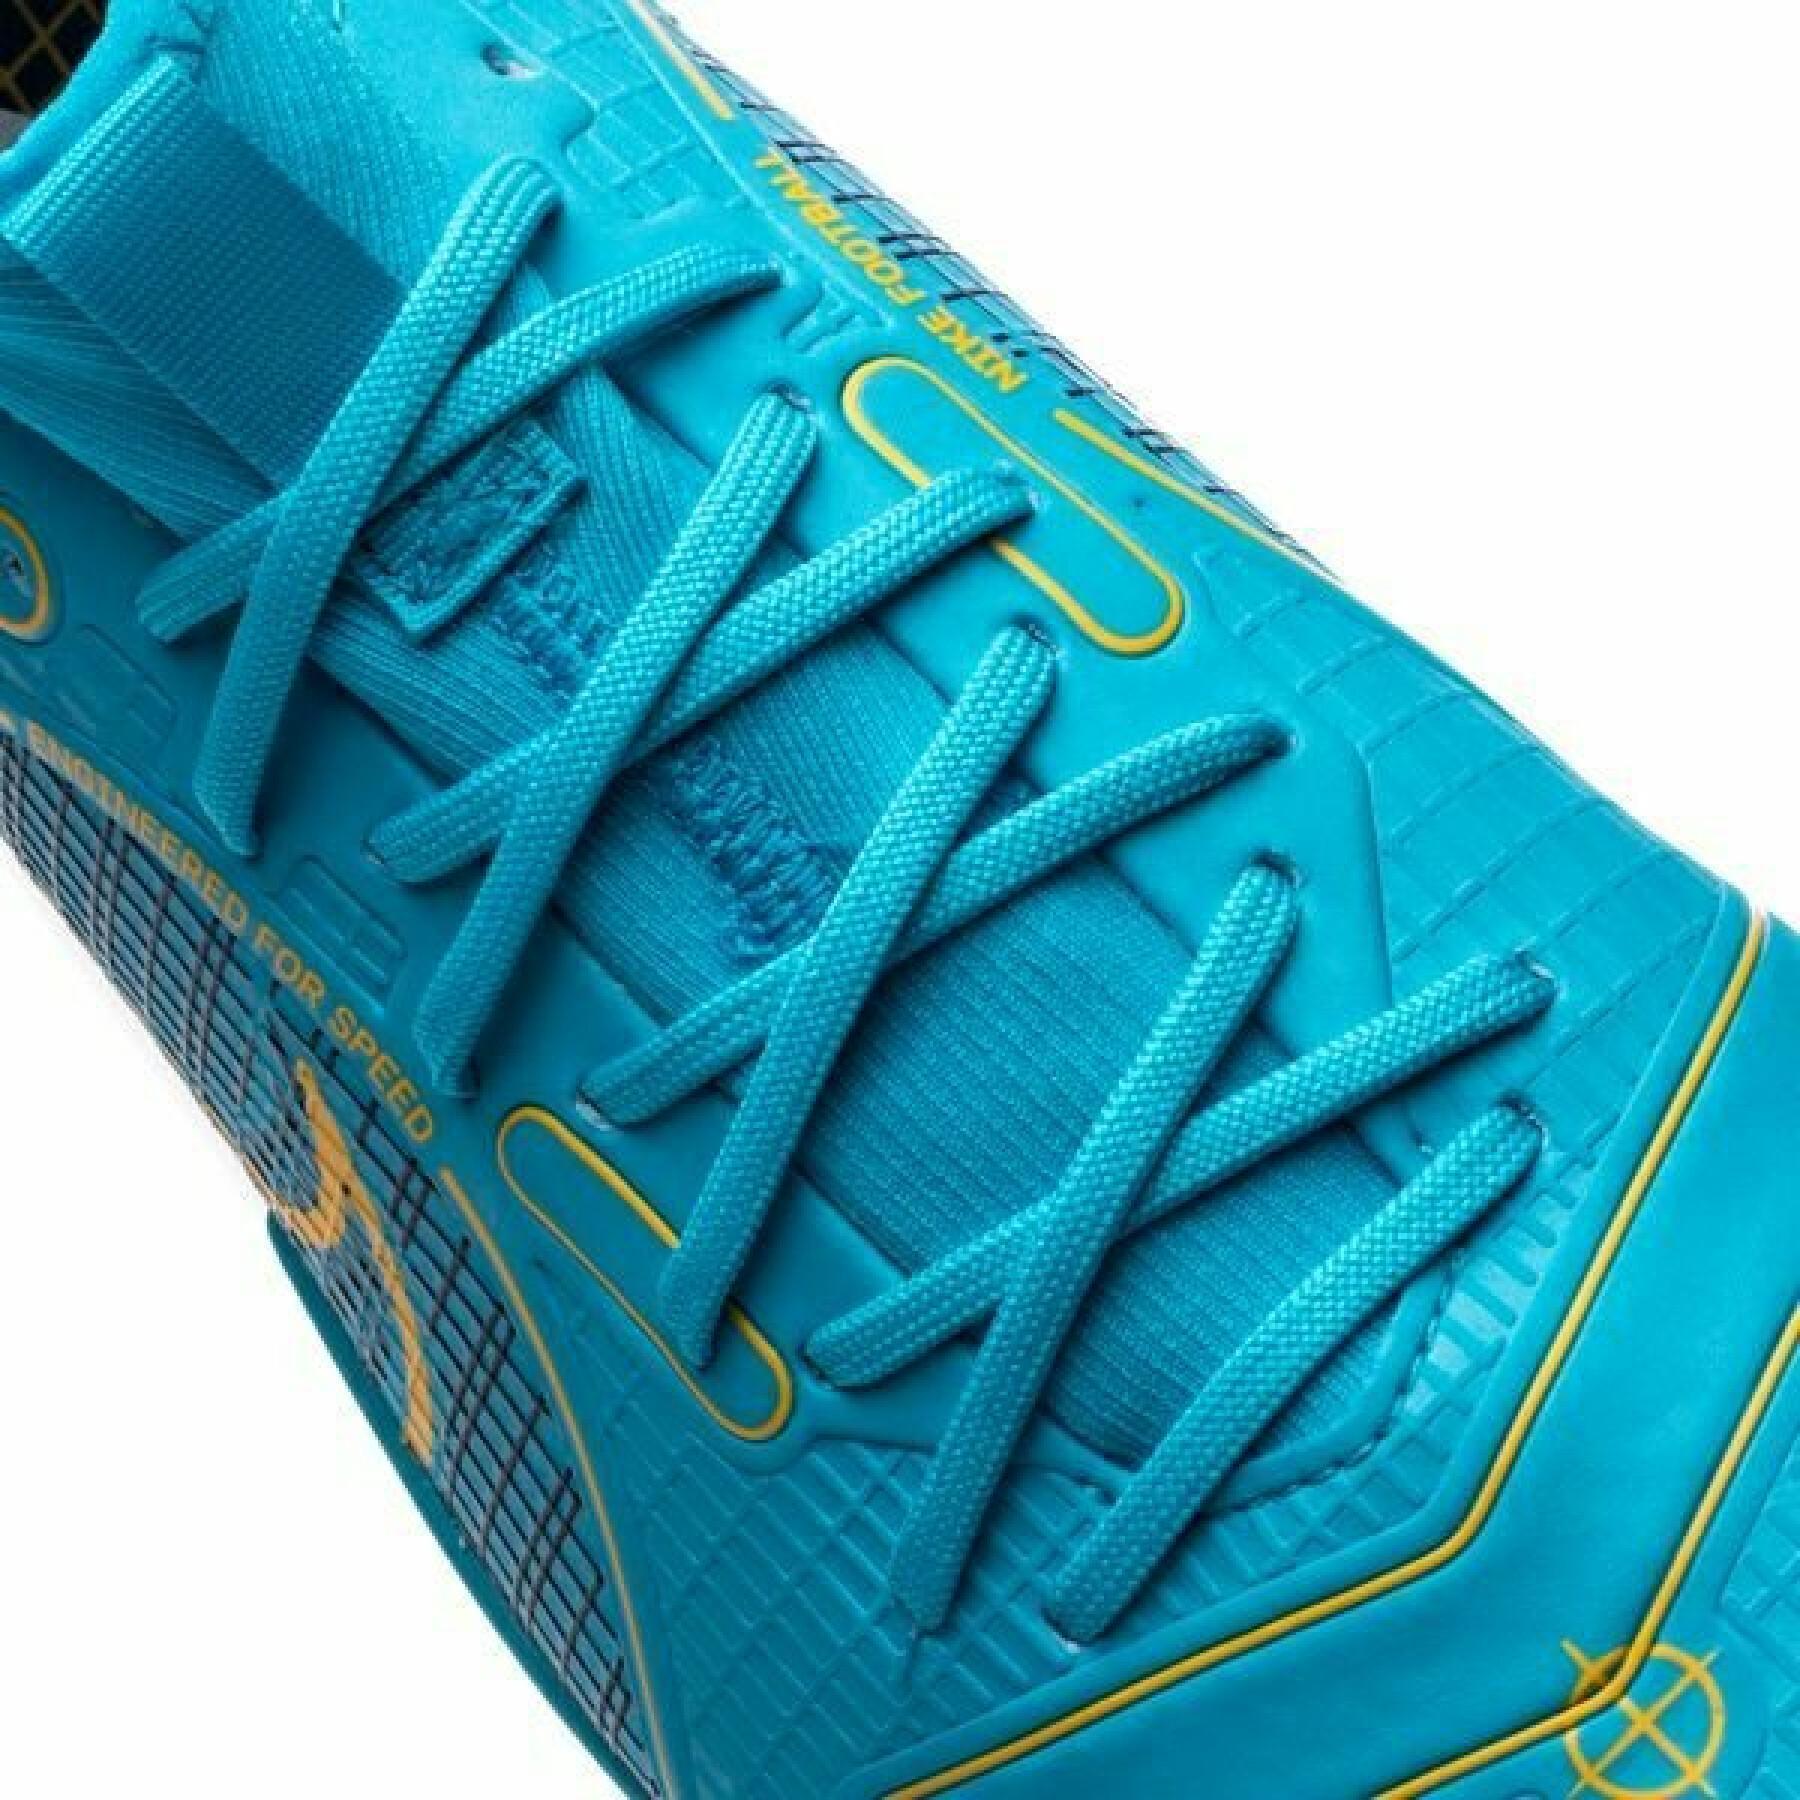 Children's soccer shoes Nike Jr. Mercurial Superfly 8 Academy TF -Blueprint Pack